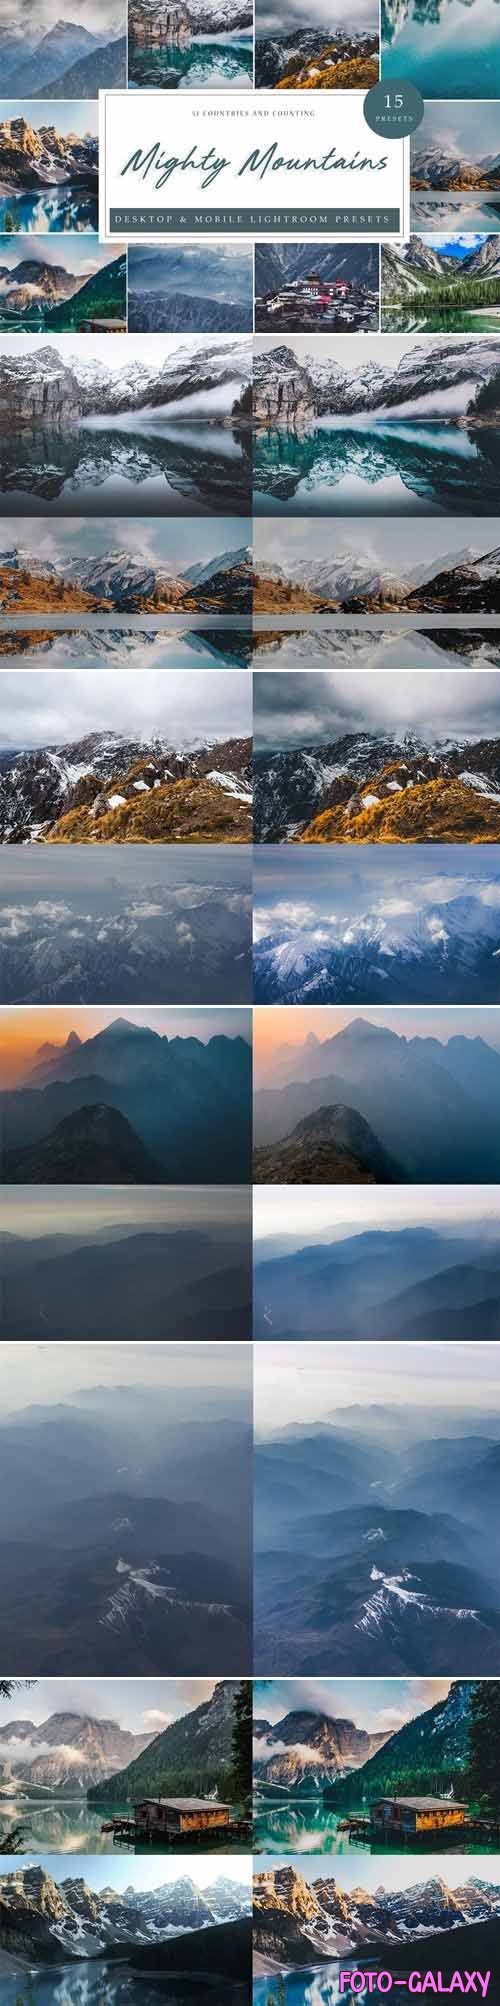 Lightroom Presets - Mighty Mountains